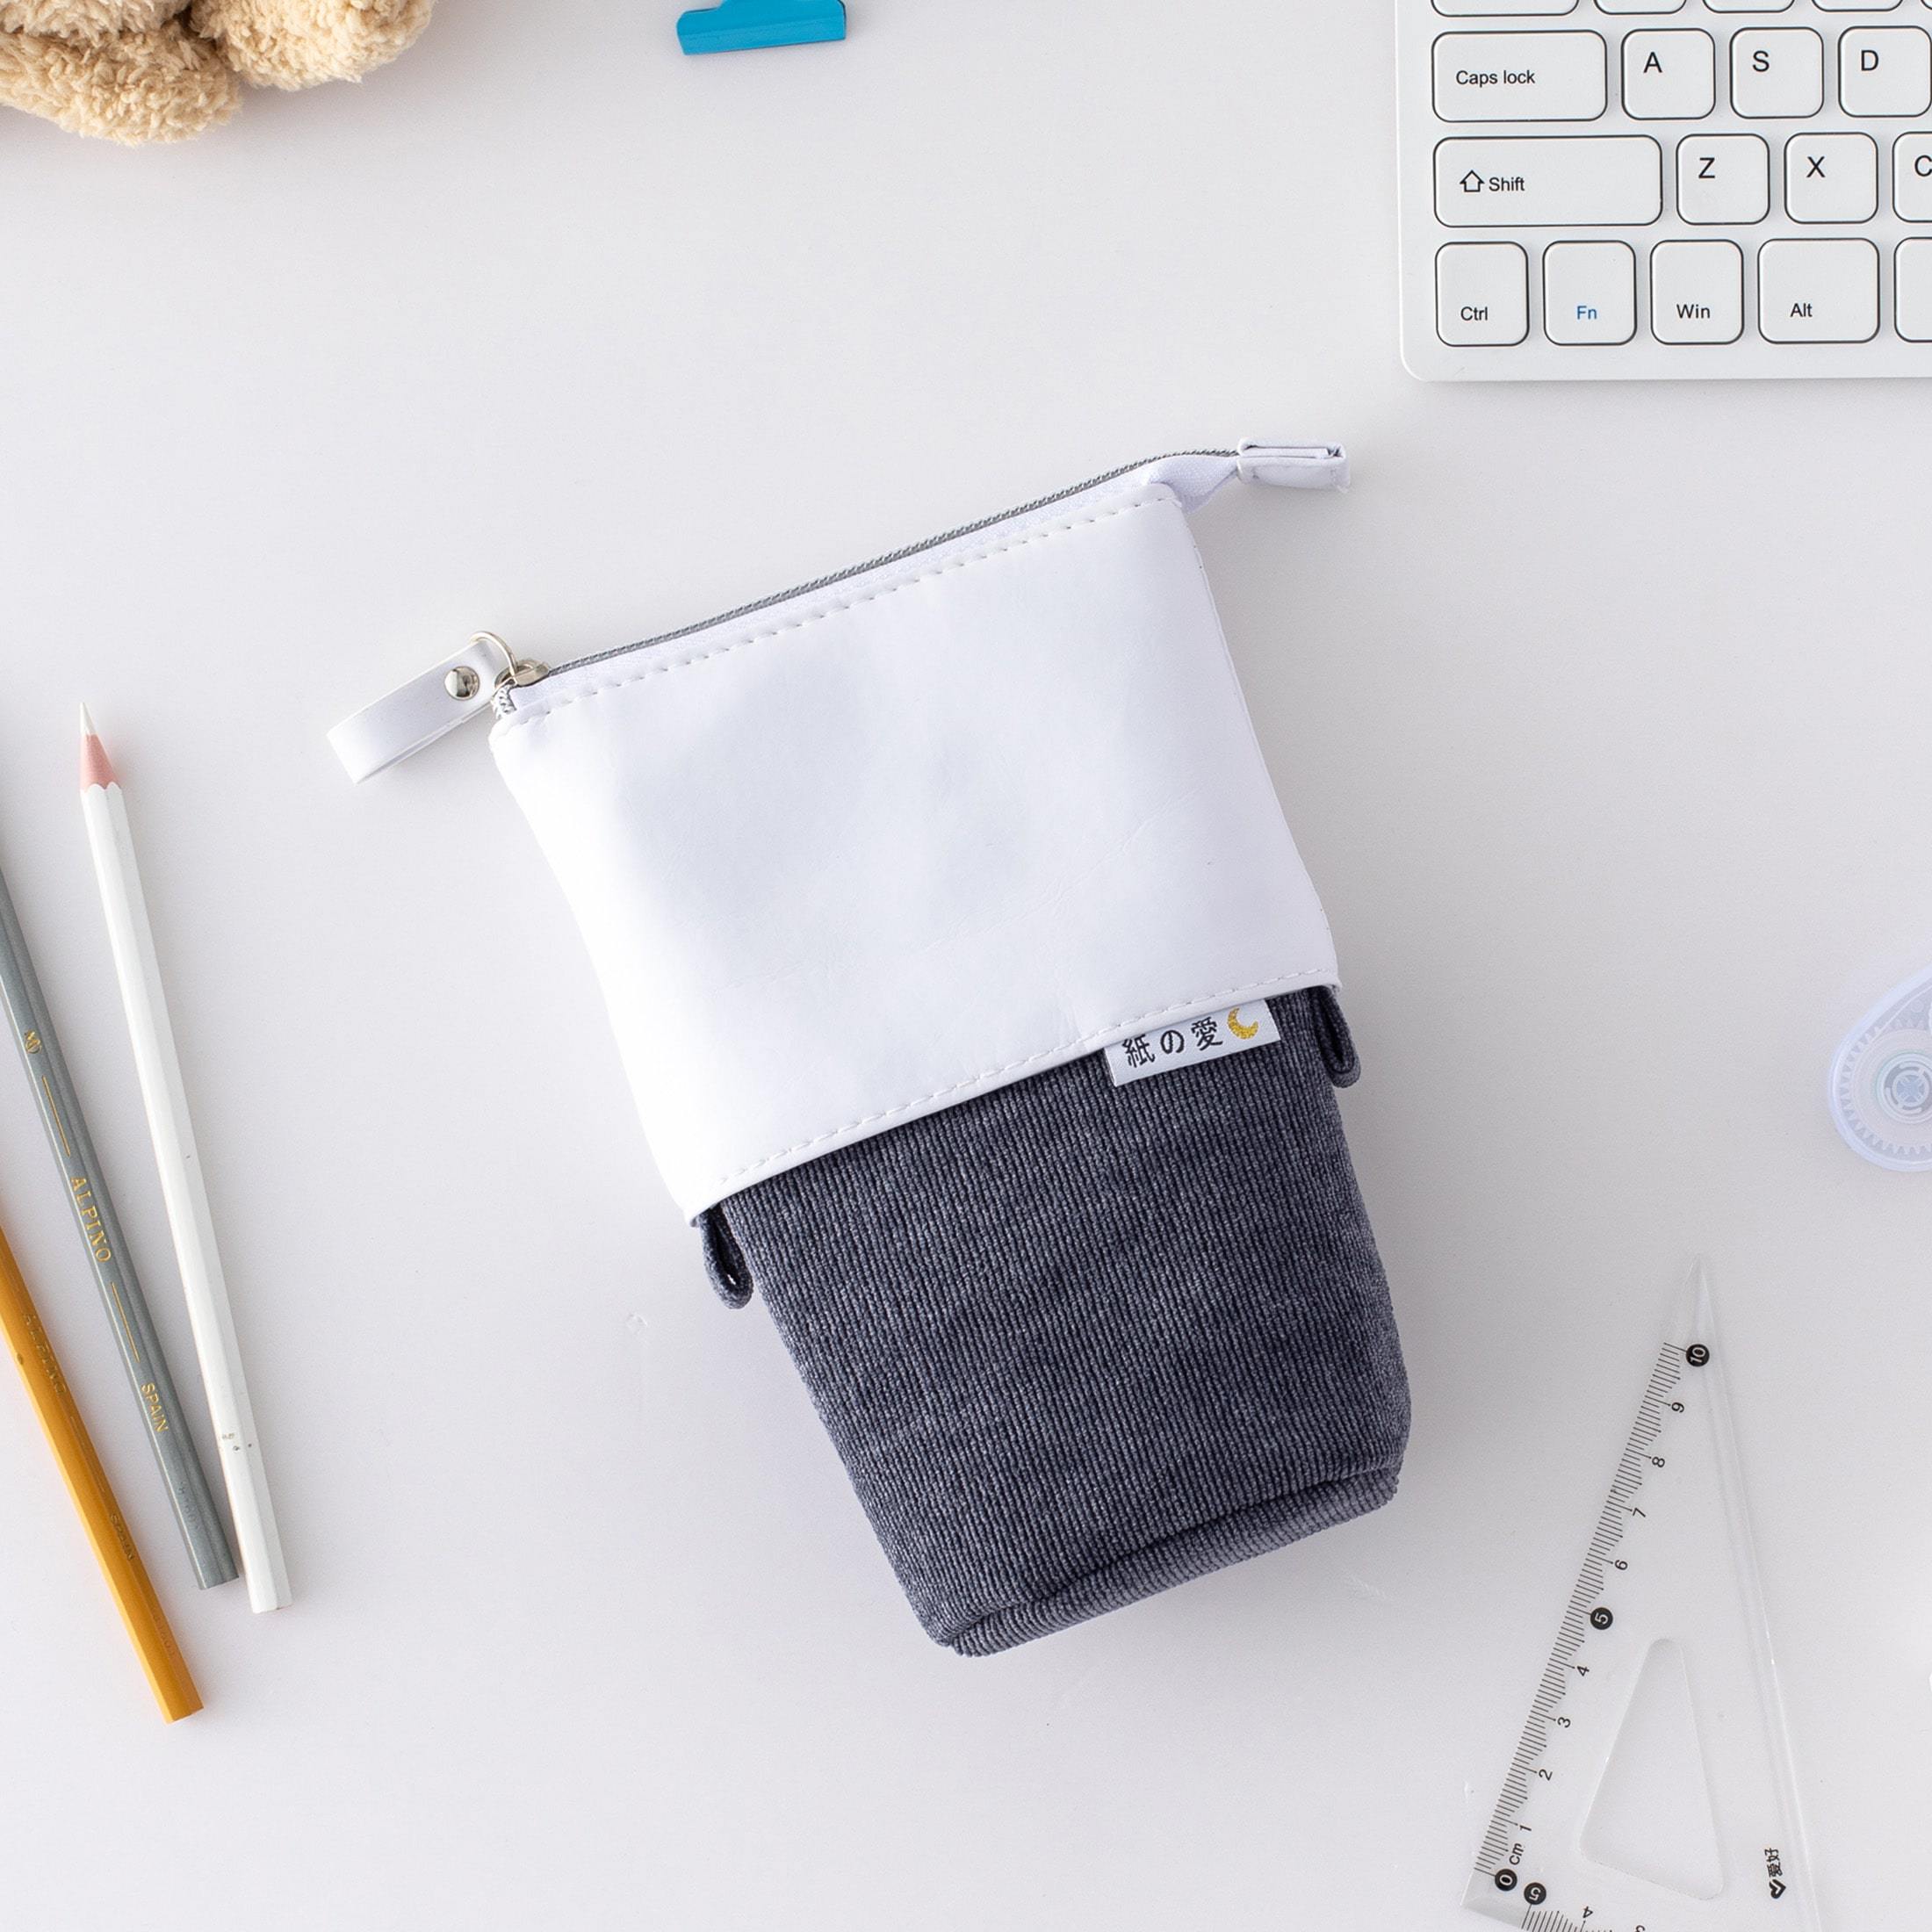 Tsuki Pop-up Standing Pencil Case ☾ – NotebookTherapy